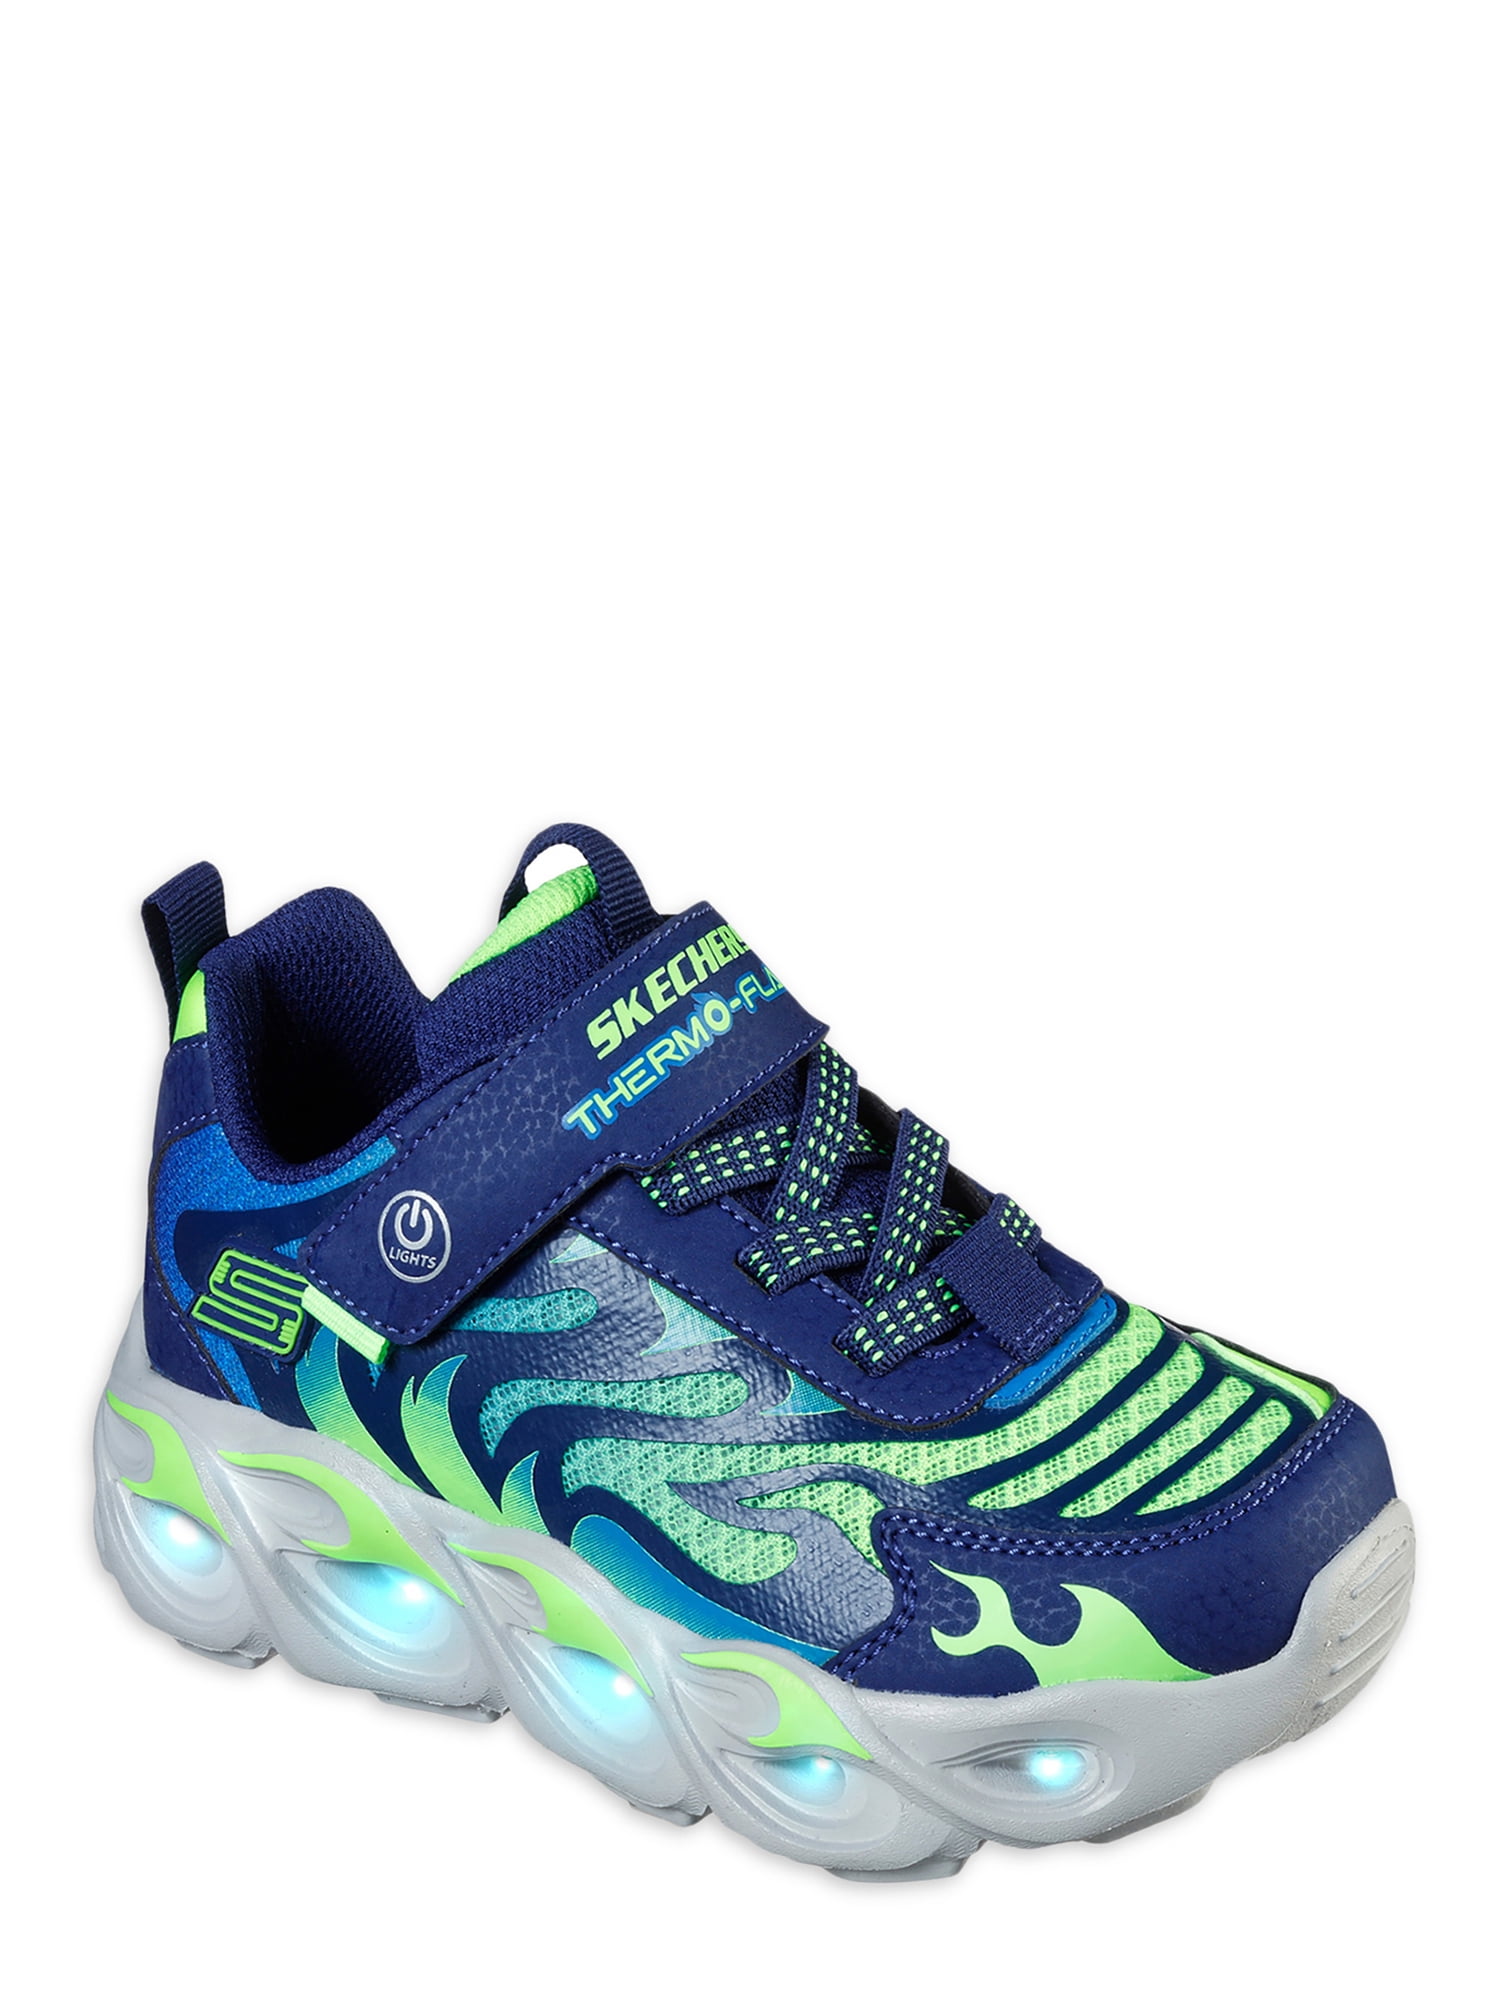 Little & Thermoflash Lighted Athletic Sneakers, Sizes 10-5 - Walmart.com